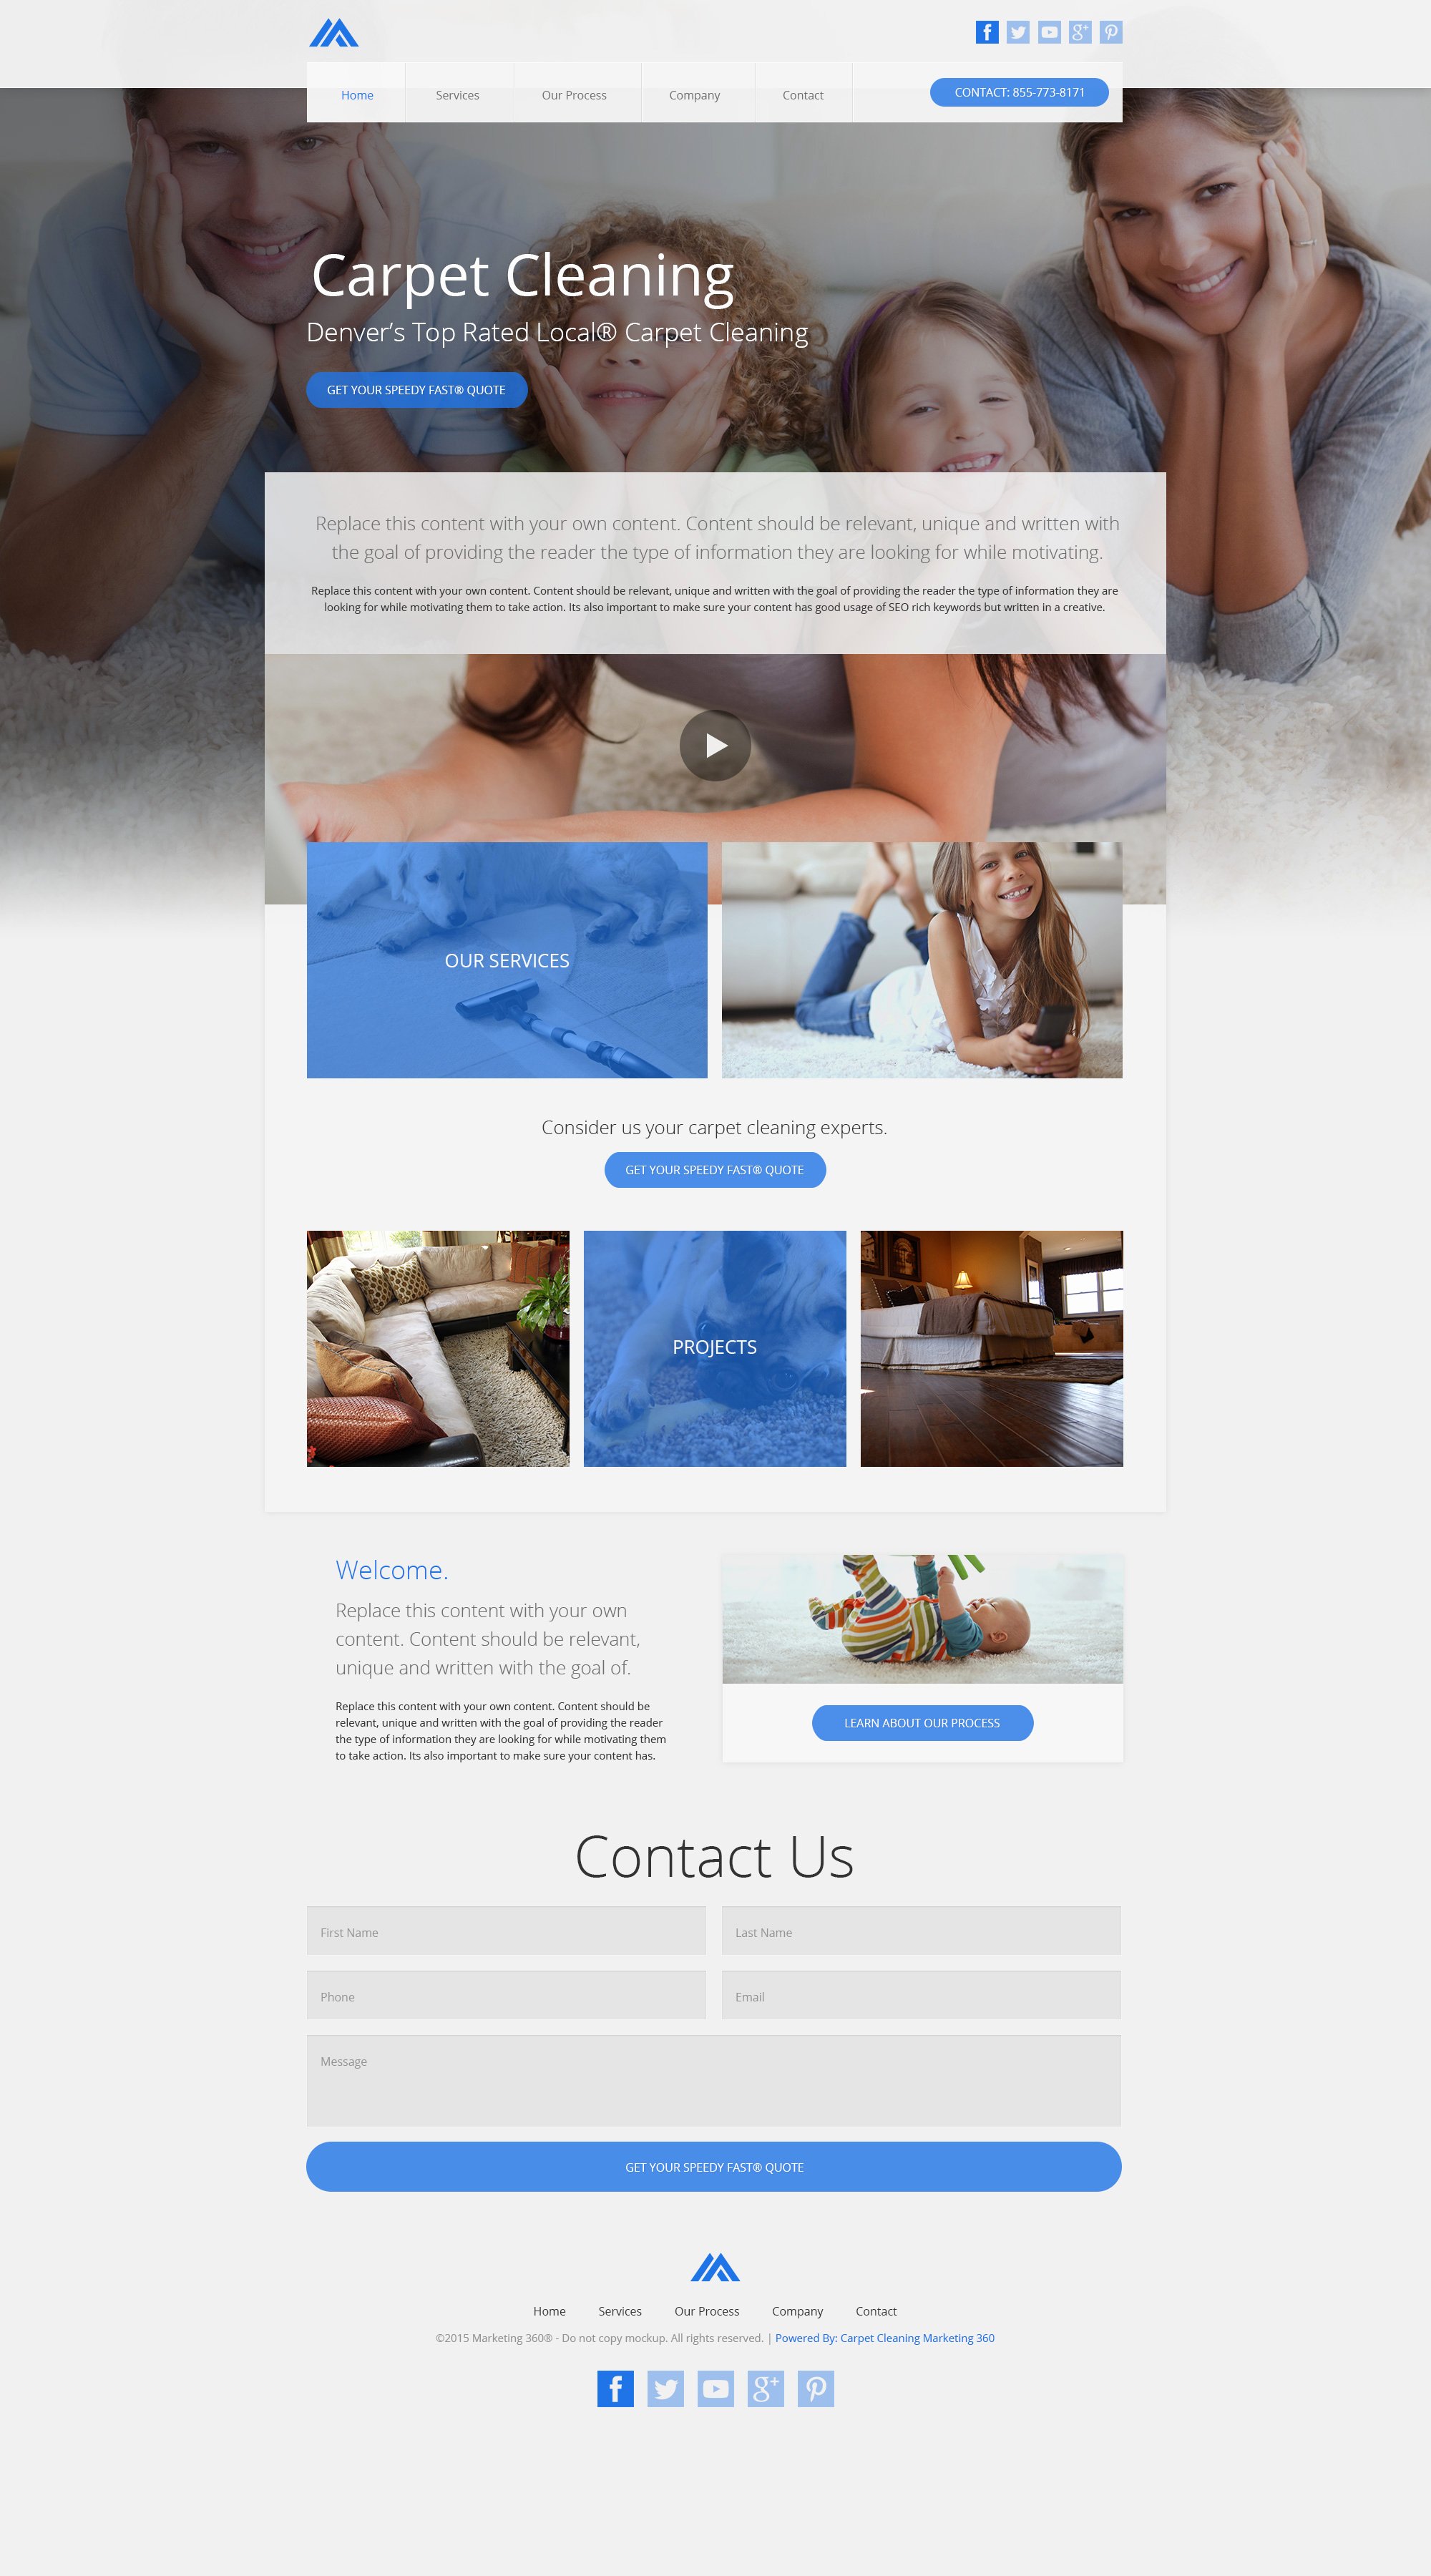 Carpet Cleaning Website Template Awesome Carpet Cleaning Website Templates Mobile Responsive